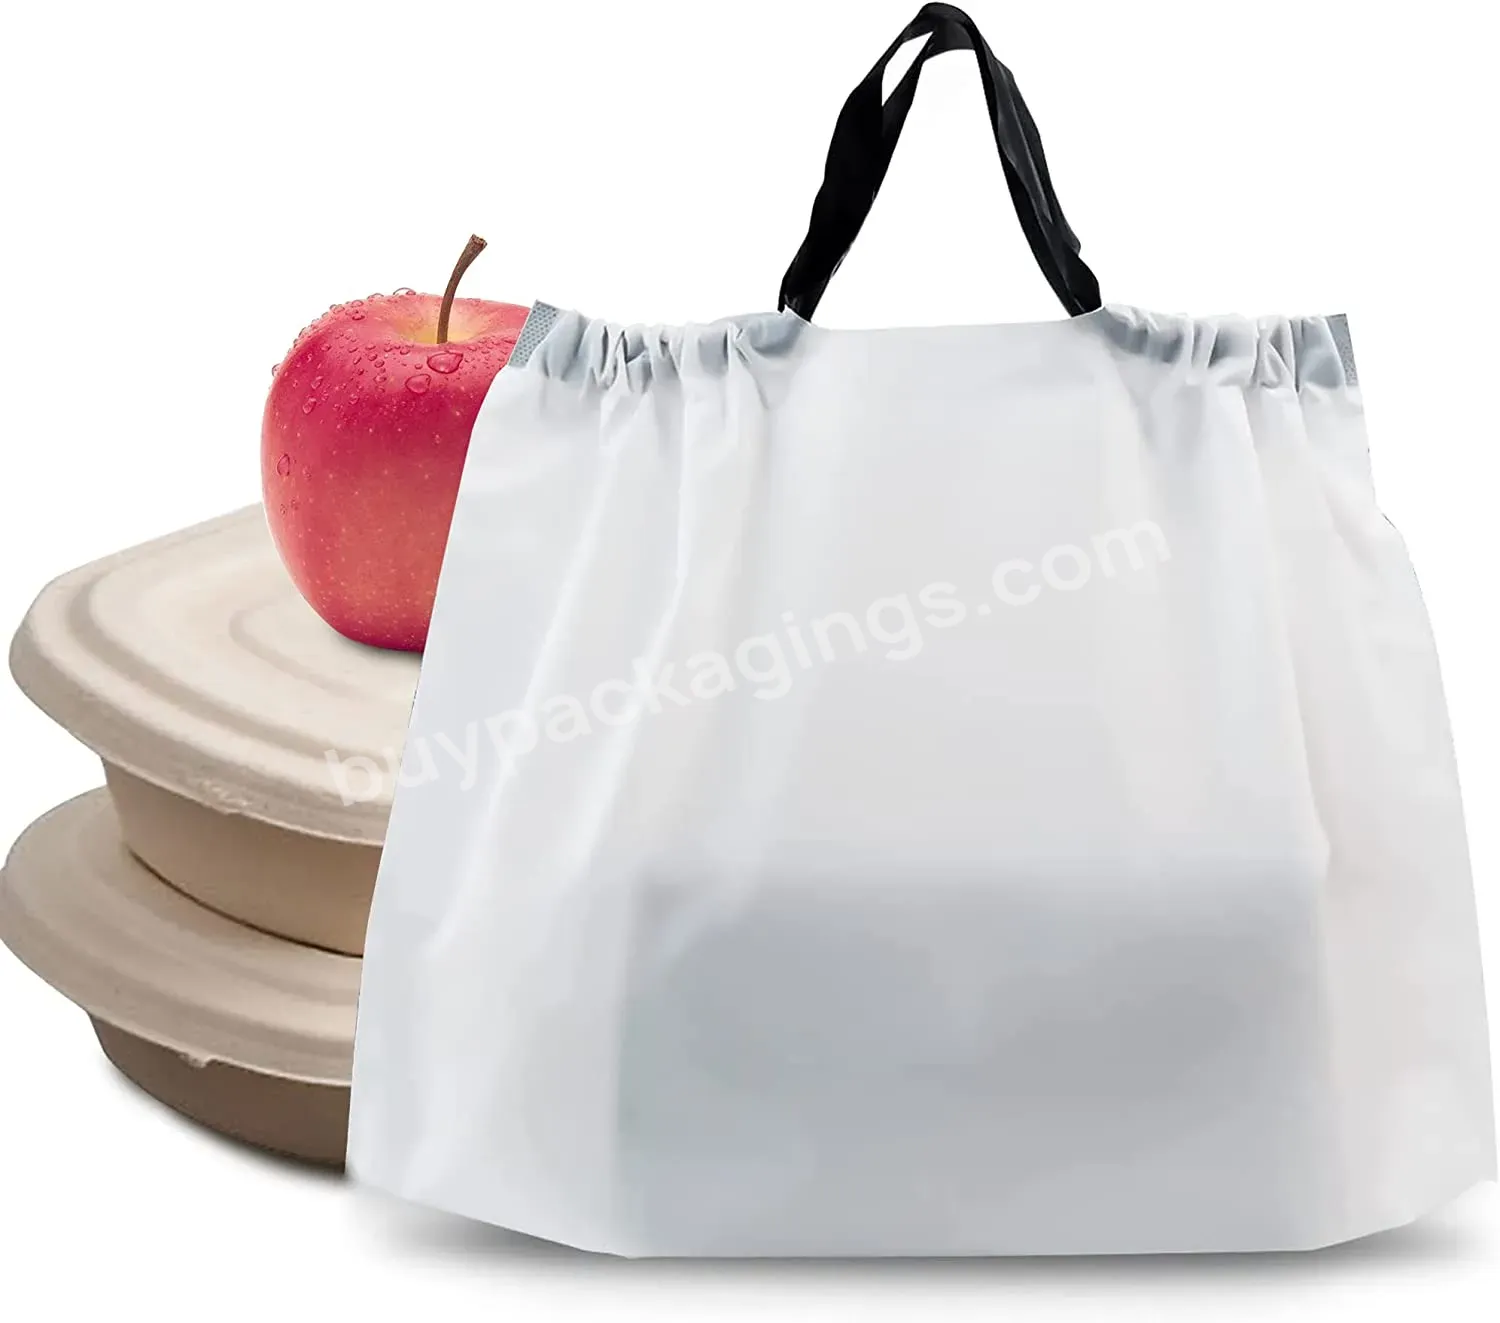 Take Out Bags With Handles Water Proof Tamper Evident To Go Bags With Seal Drawstring - Buy Take Out Bags With Handles,To Go Bags With Seal Drawstring,Take Out Bags.